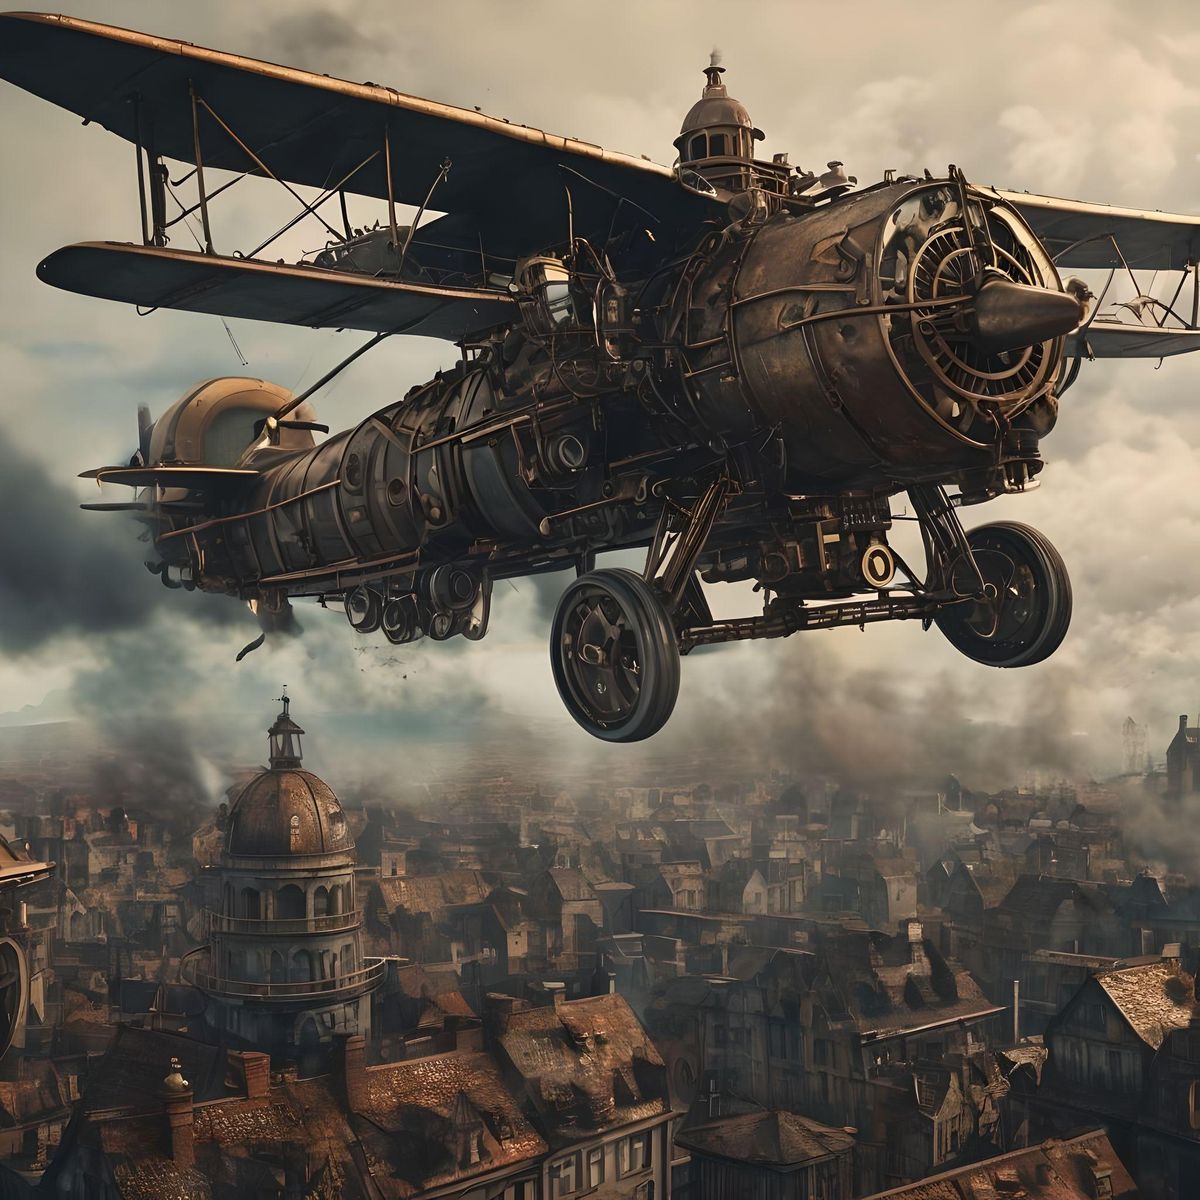 A steampunk airplane flying over a old steampunk city with smoke coming out of the back, it is flying over an old abandoned steampunk city and had cogs and mechanics over it